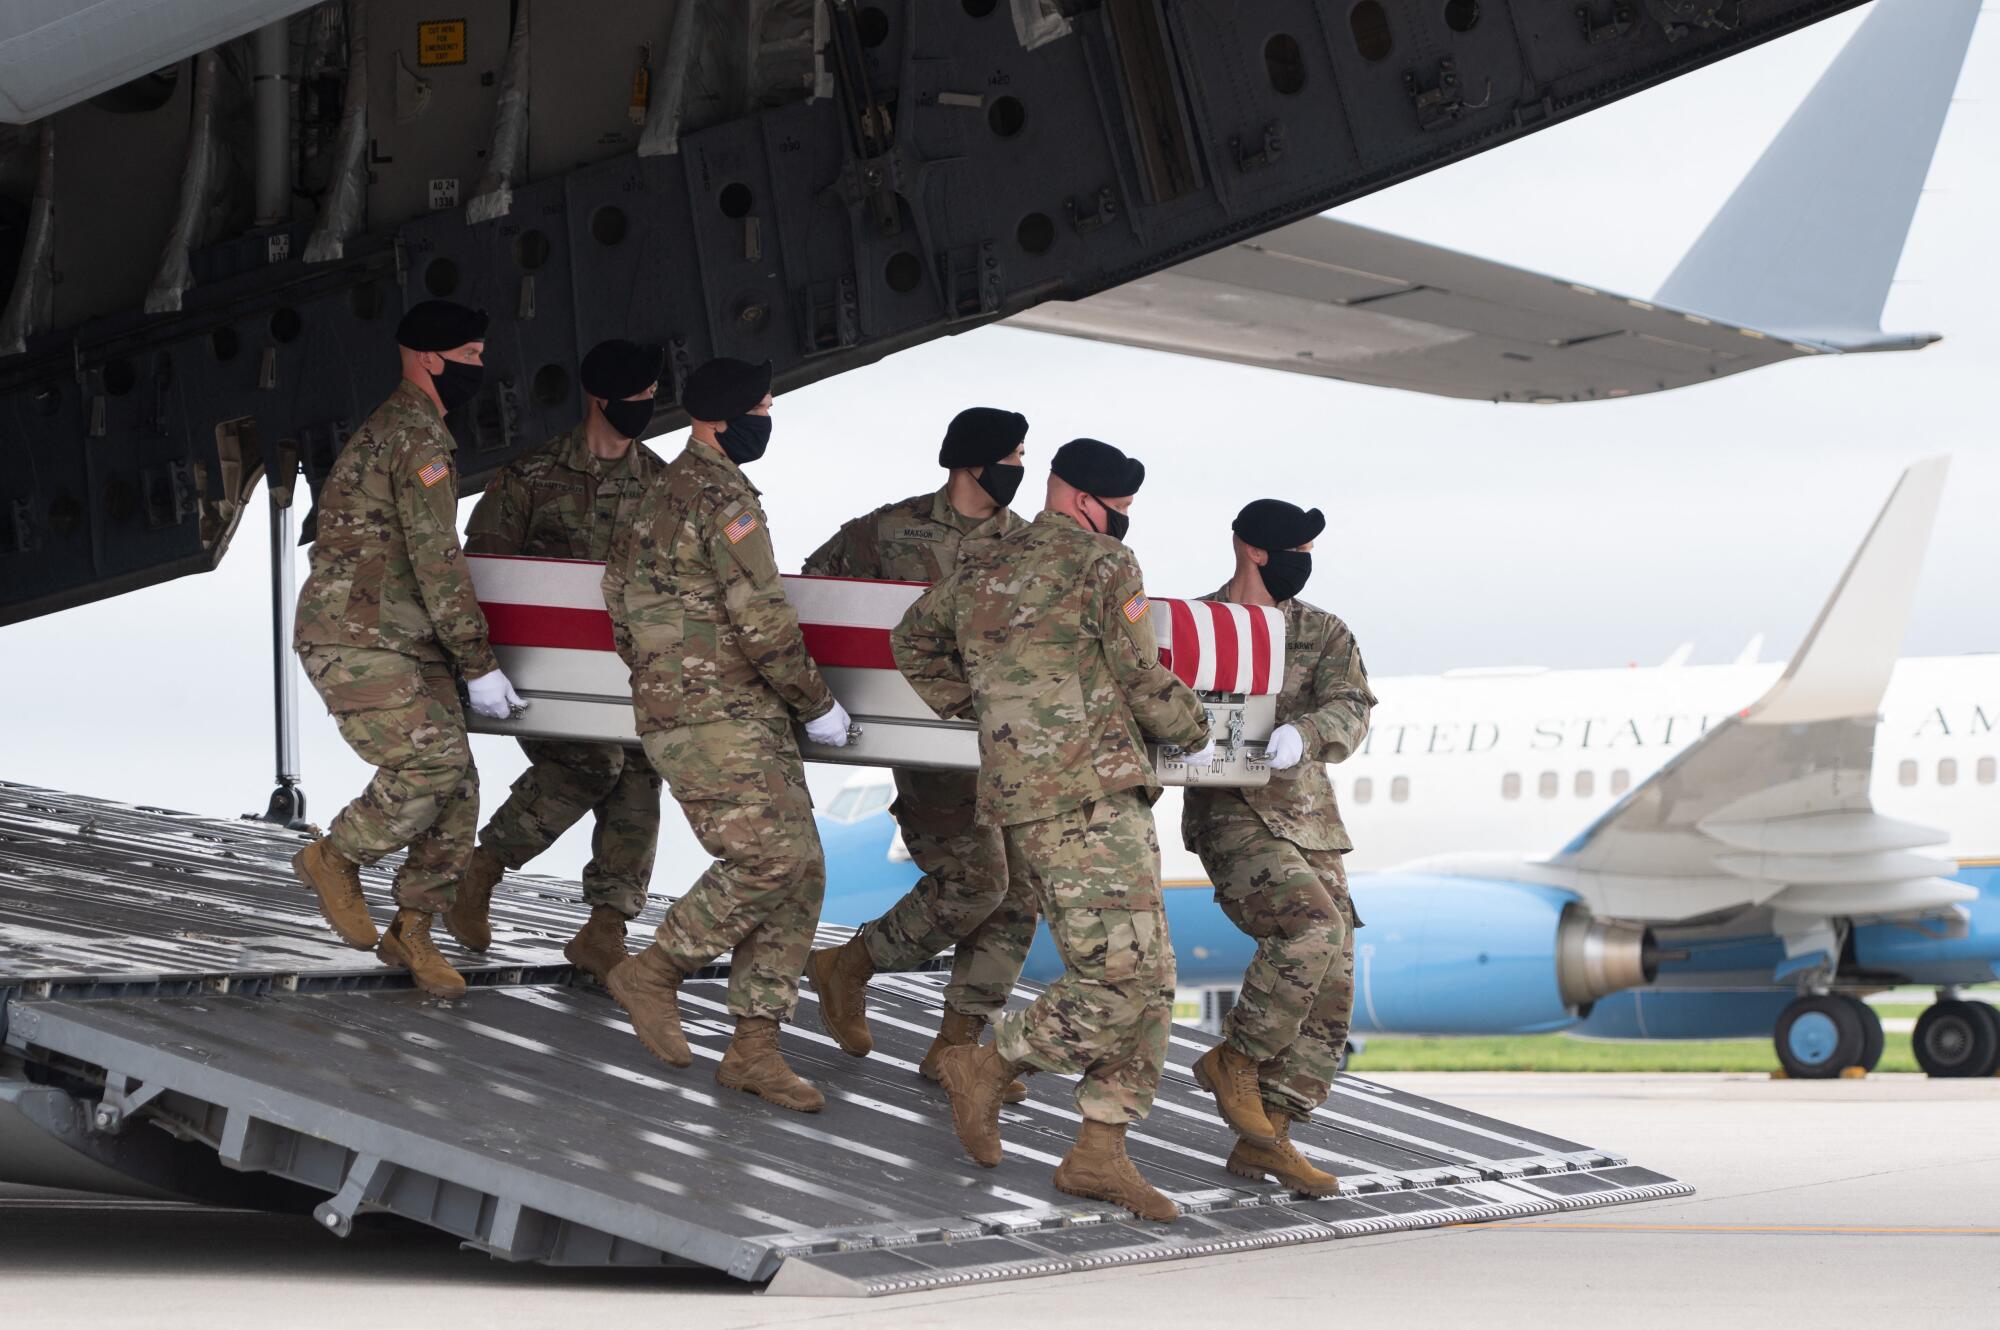 Troops carry a flag-draped case off an aircraft.